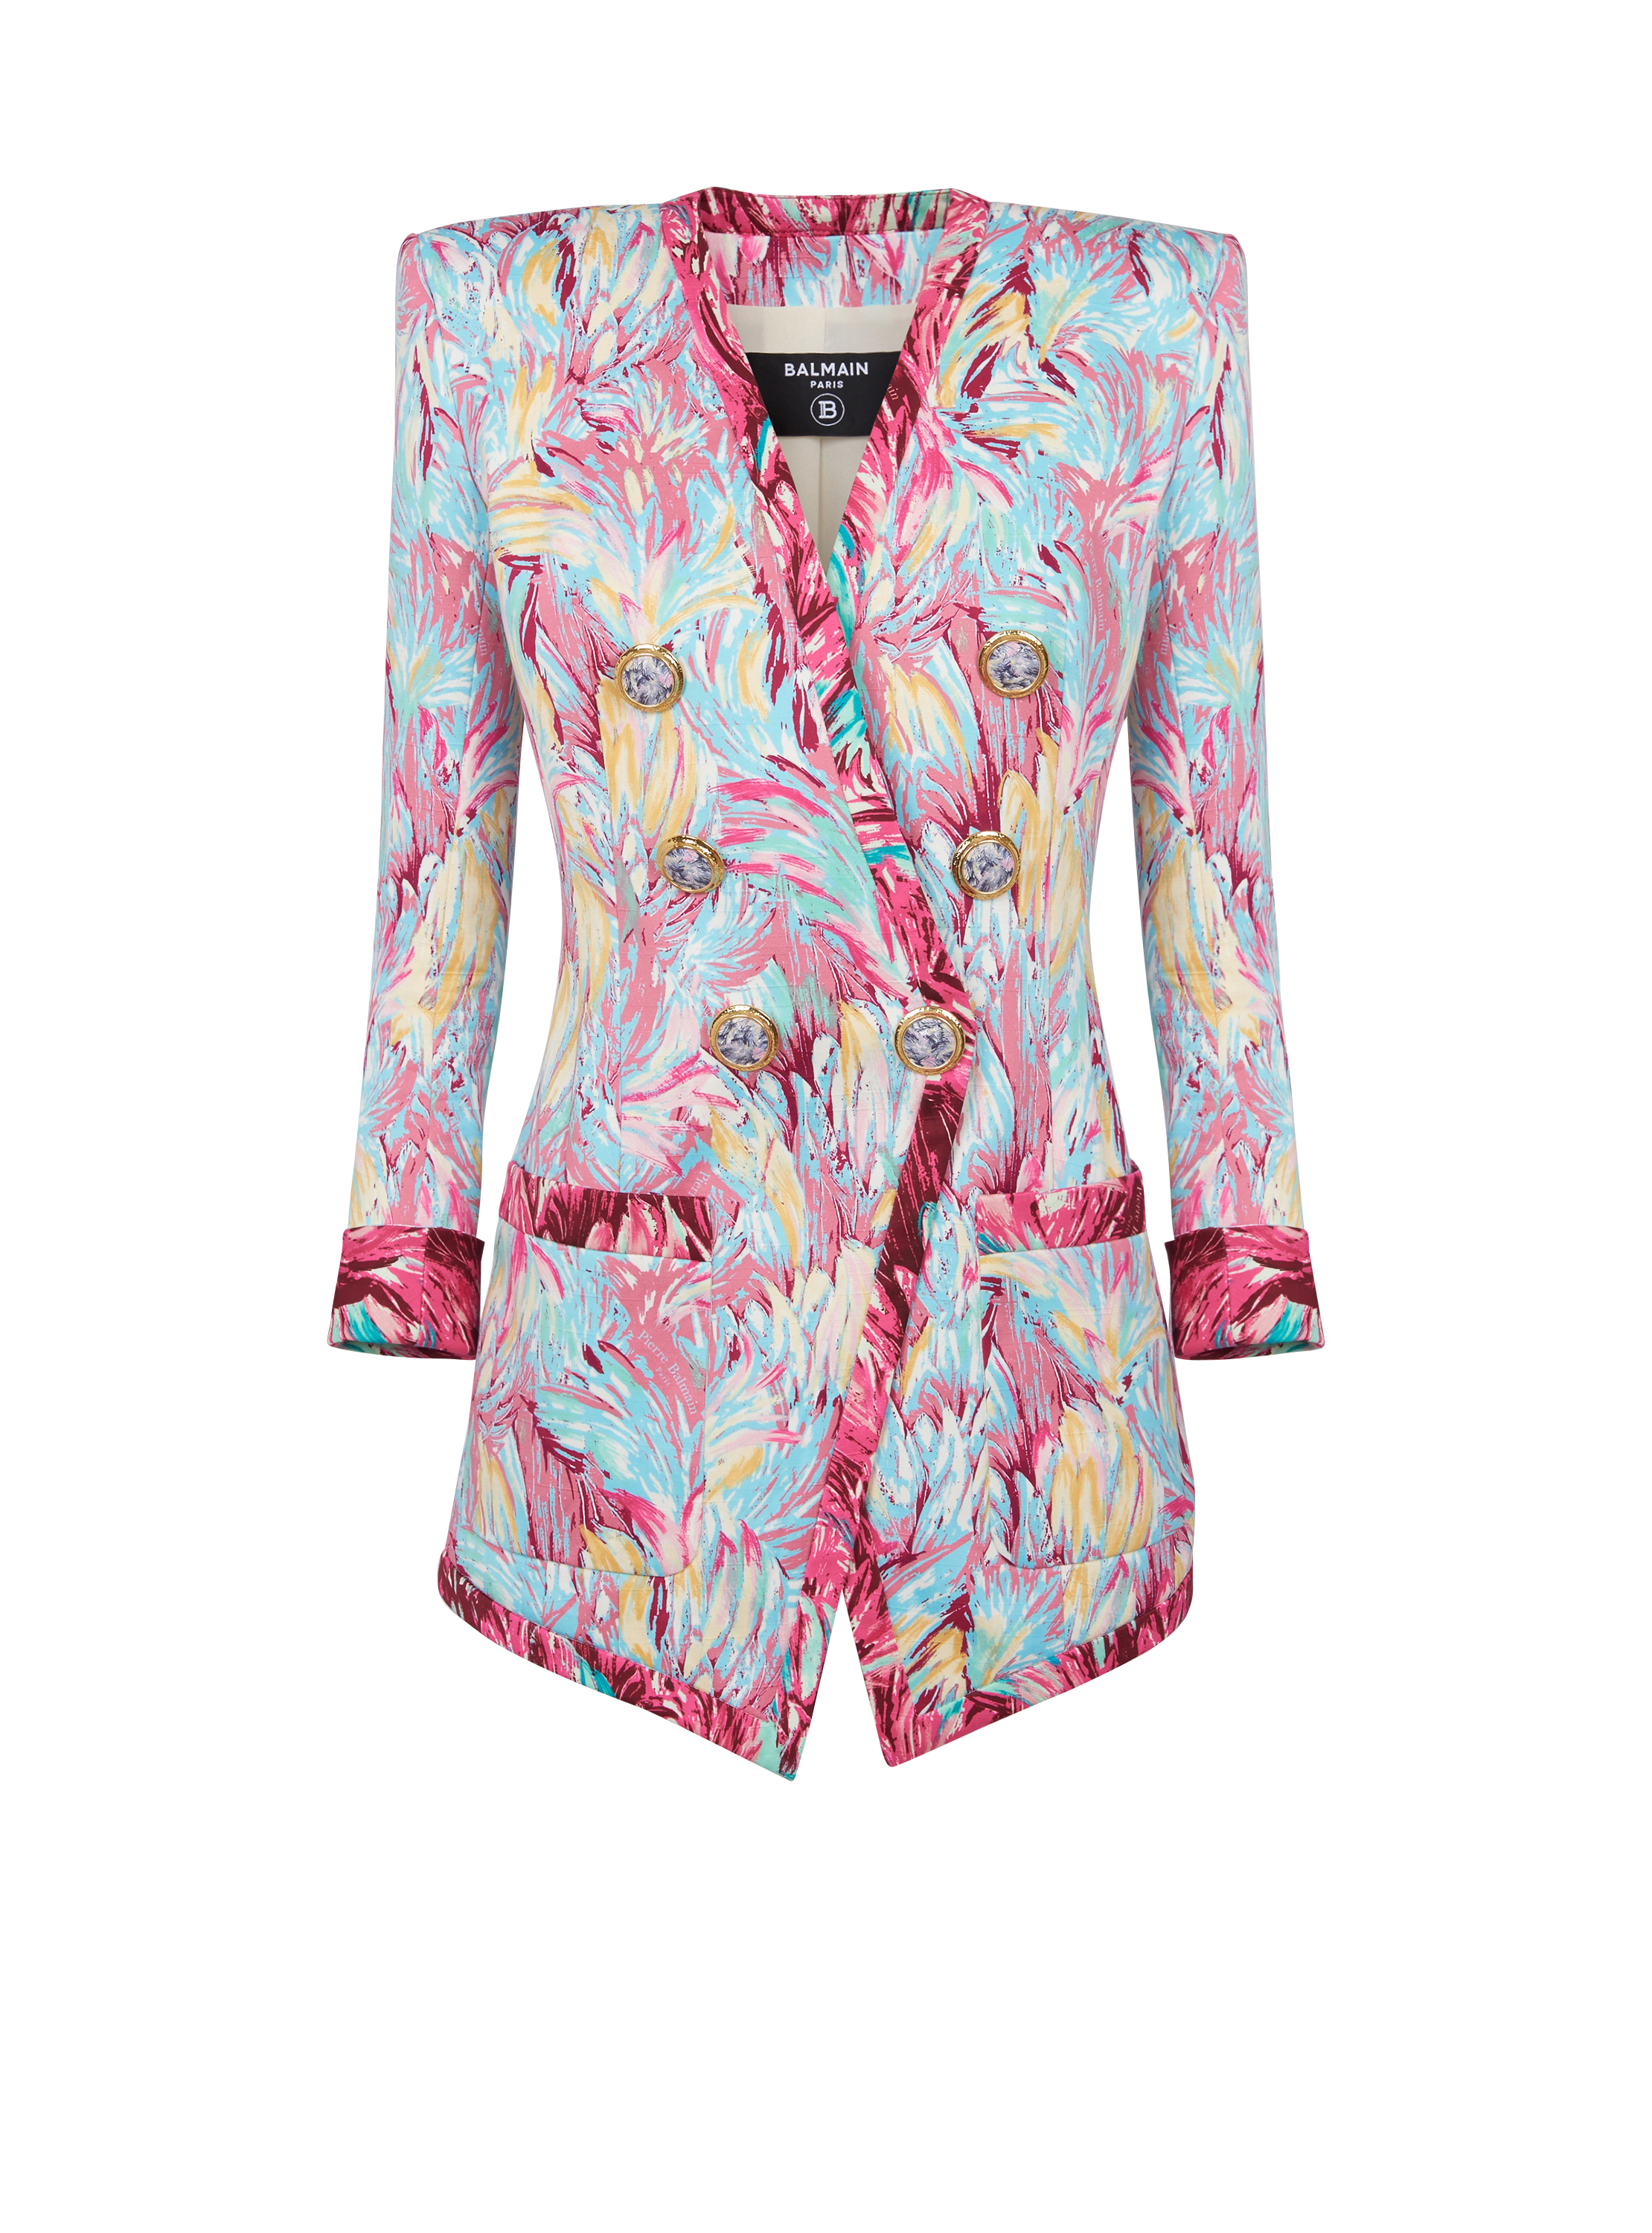 Long 6-button jacket with Feather print